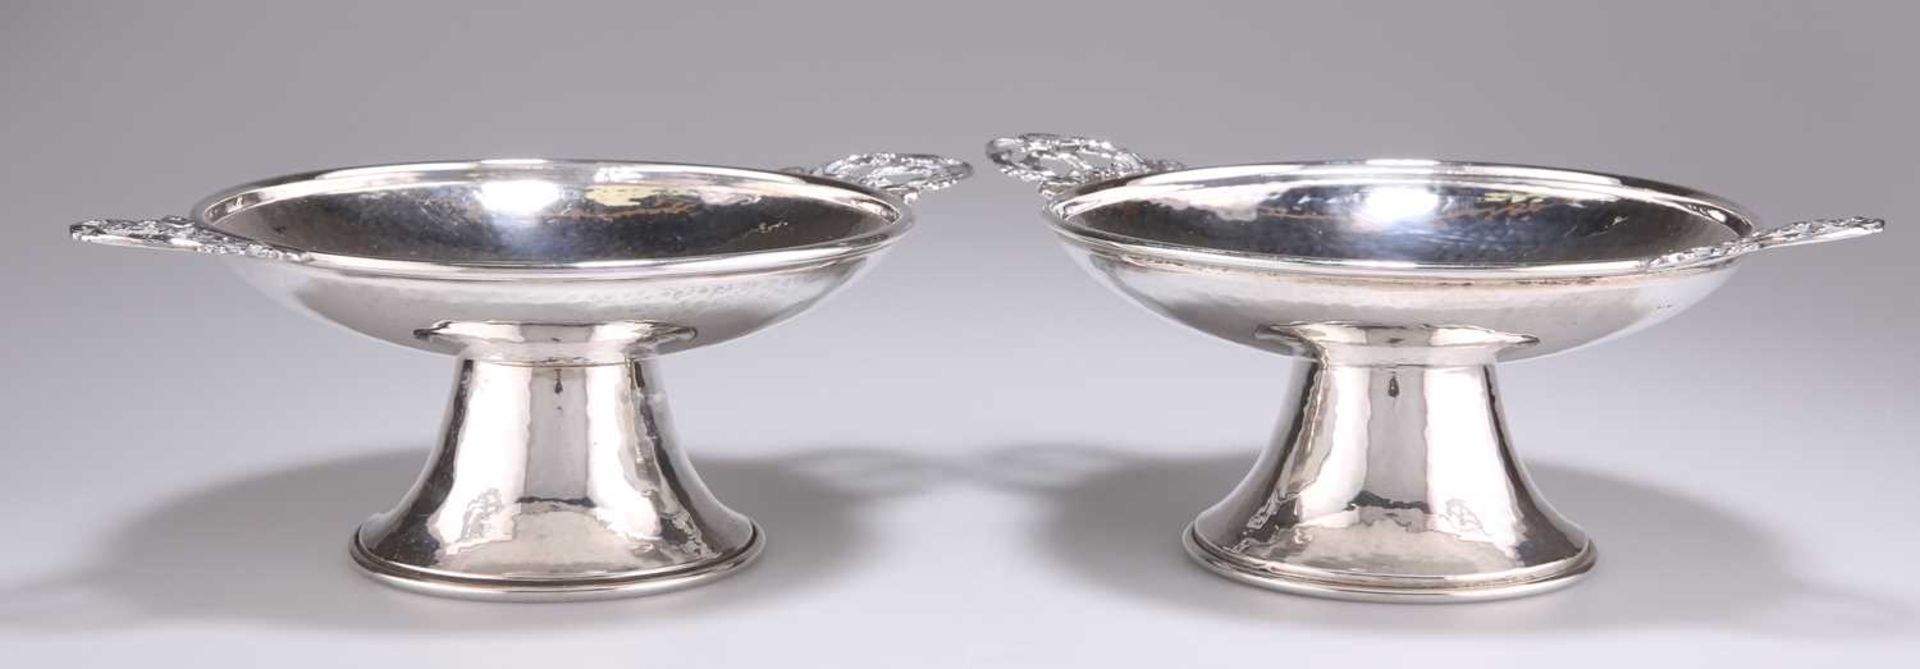 A PAIR OF ARTS AND CRAFTS SILVER TAZZAS - Image 2 of 3